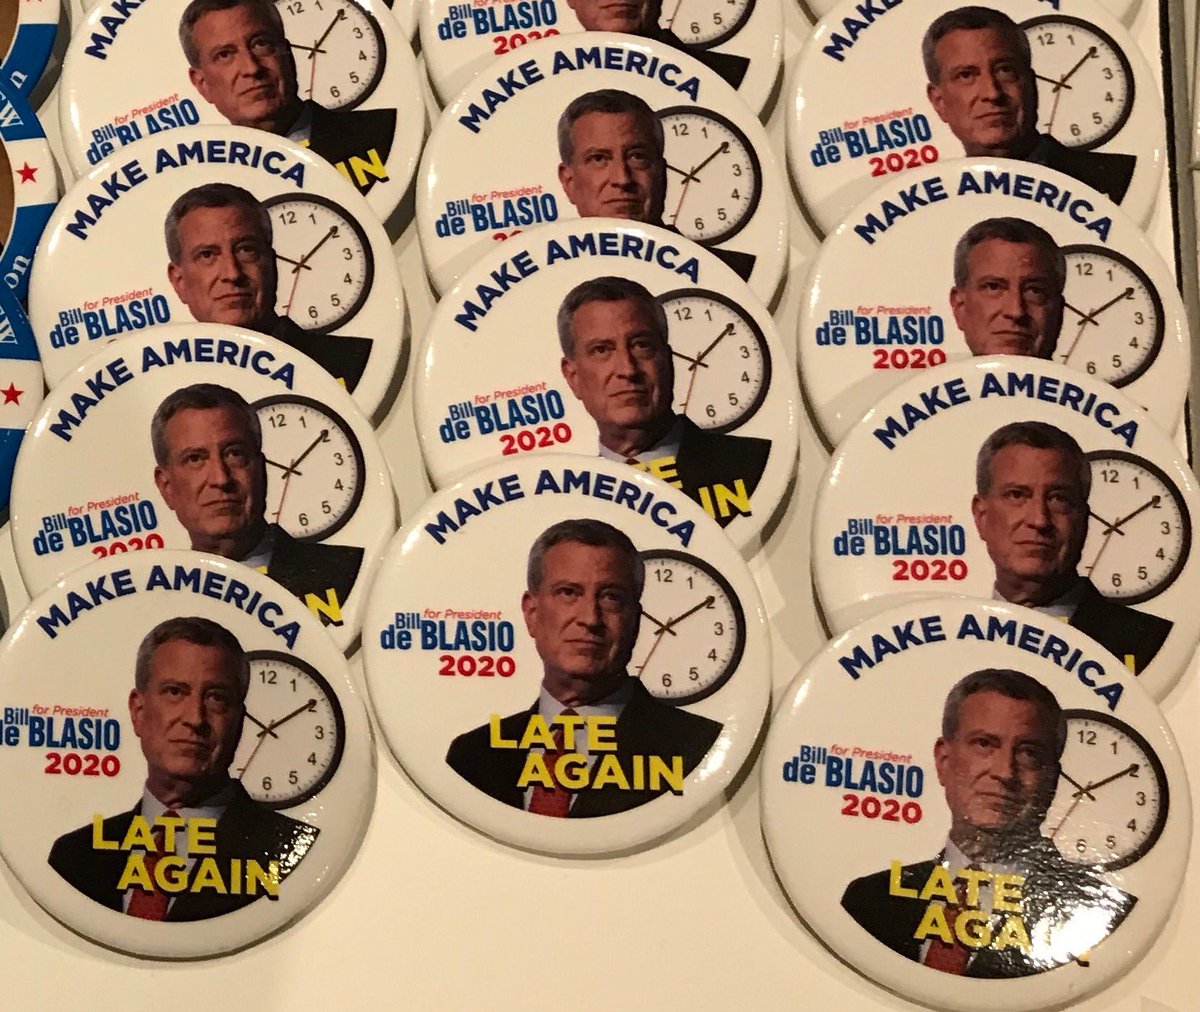 The button for #2020? It got a big laugh at the annual reporters’ spoof of NYC politics at ⁦@InnerCircleNY⁩ Show’s Friday night dress rehearsal. Come see the full show Saturday - when Mayor ⁦@NYCMayor⁩ performs, too. Tickets still available.